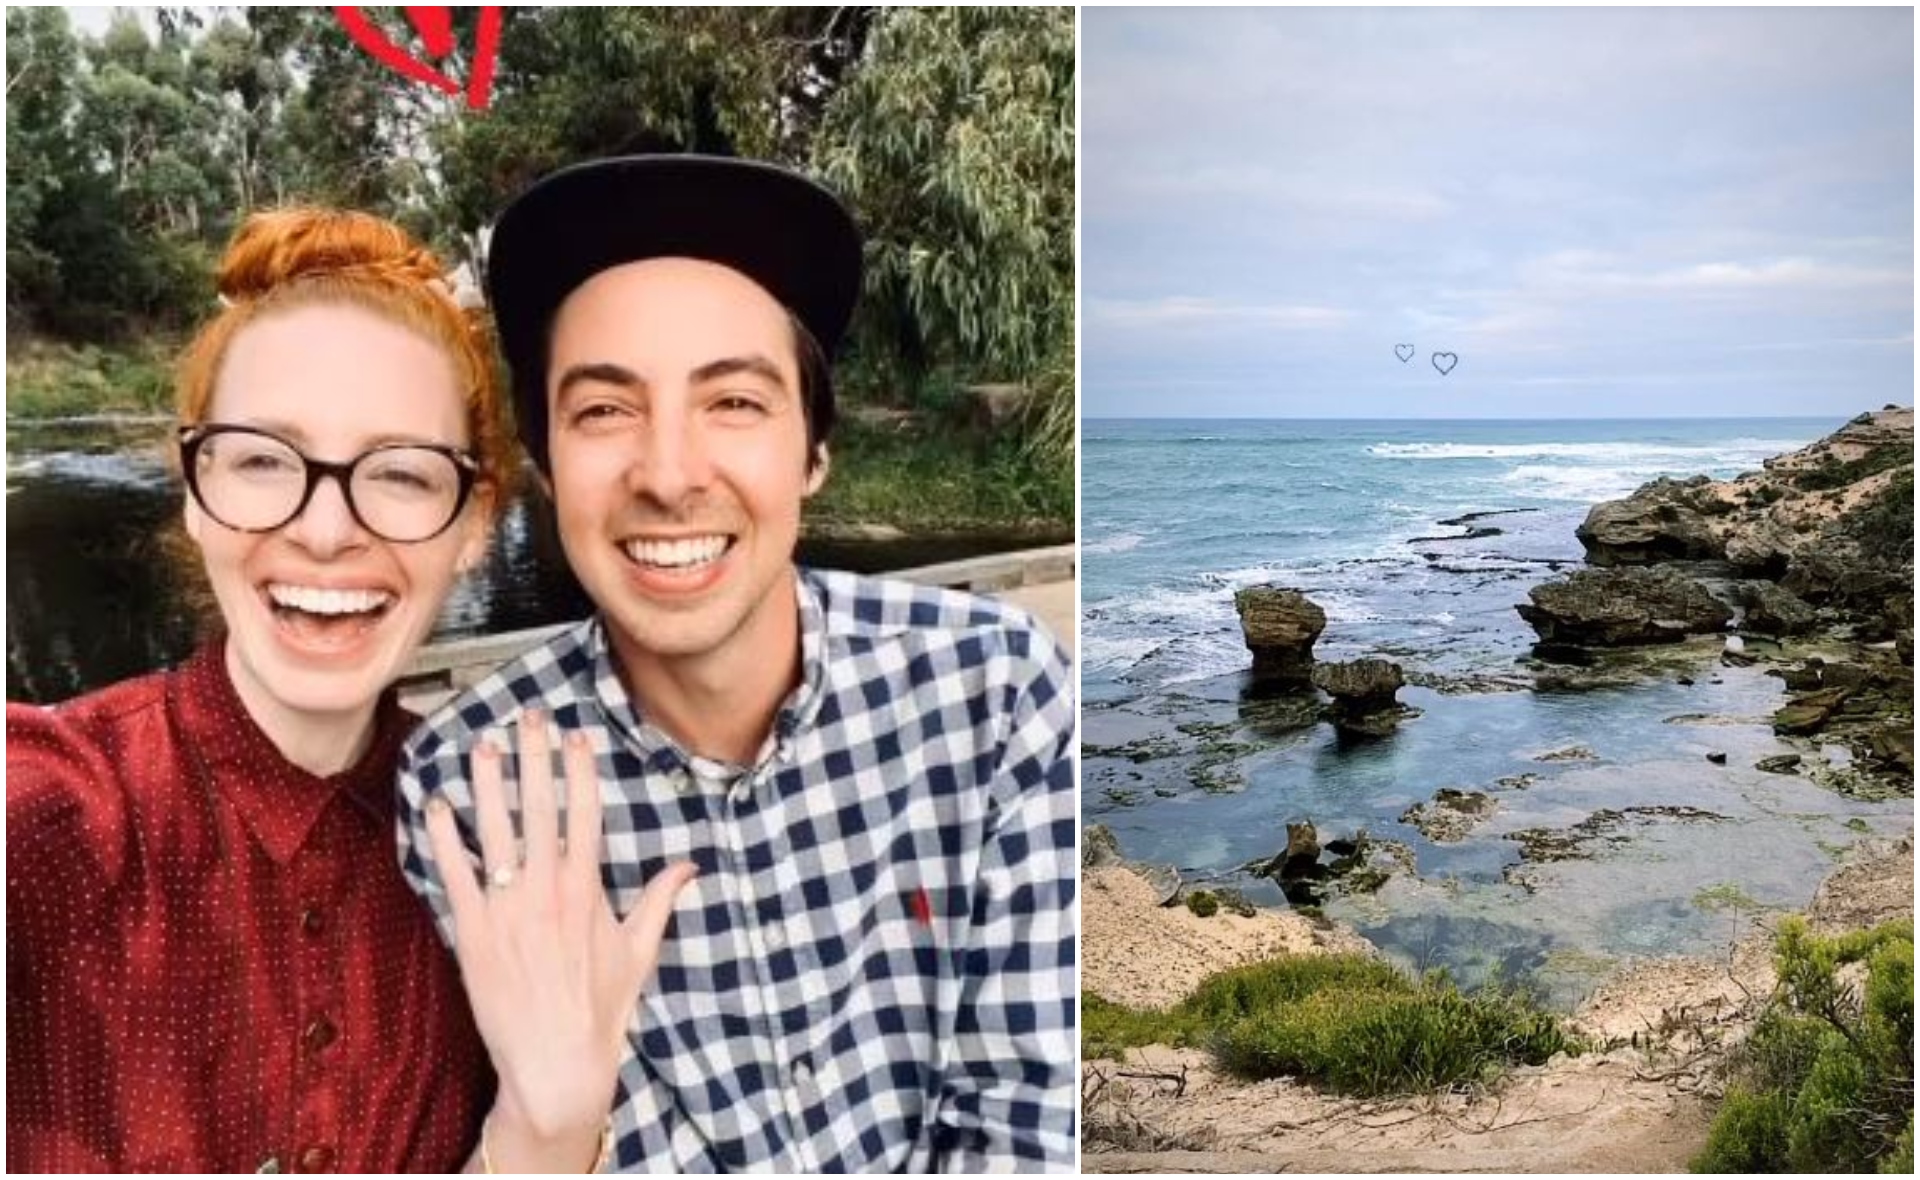 Emma Wiggle reveals the incredible location where Oliver Brian popped the question and gives a close-up look at her stunning engagement ring